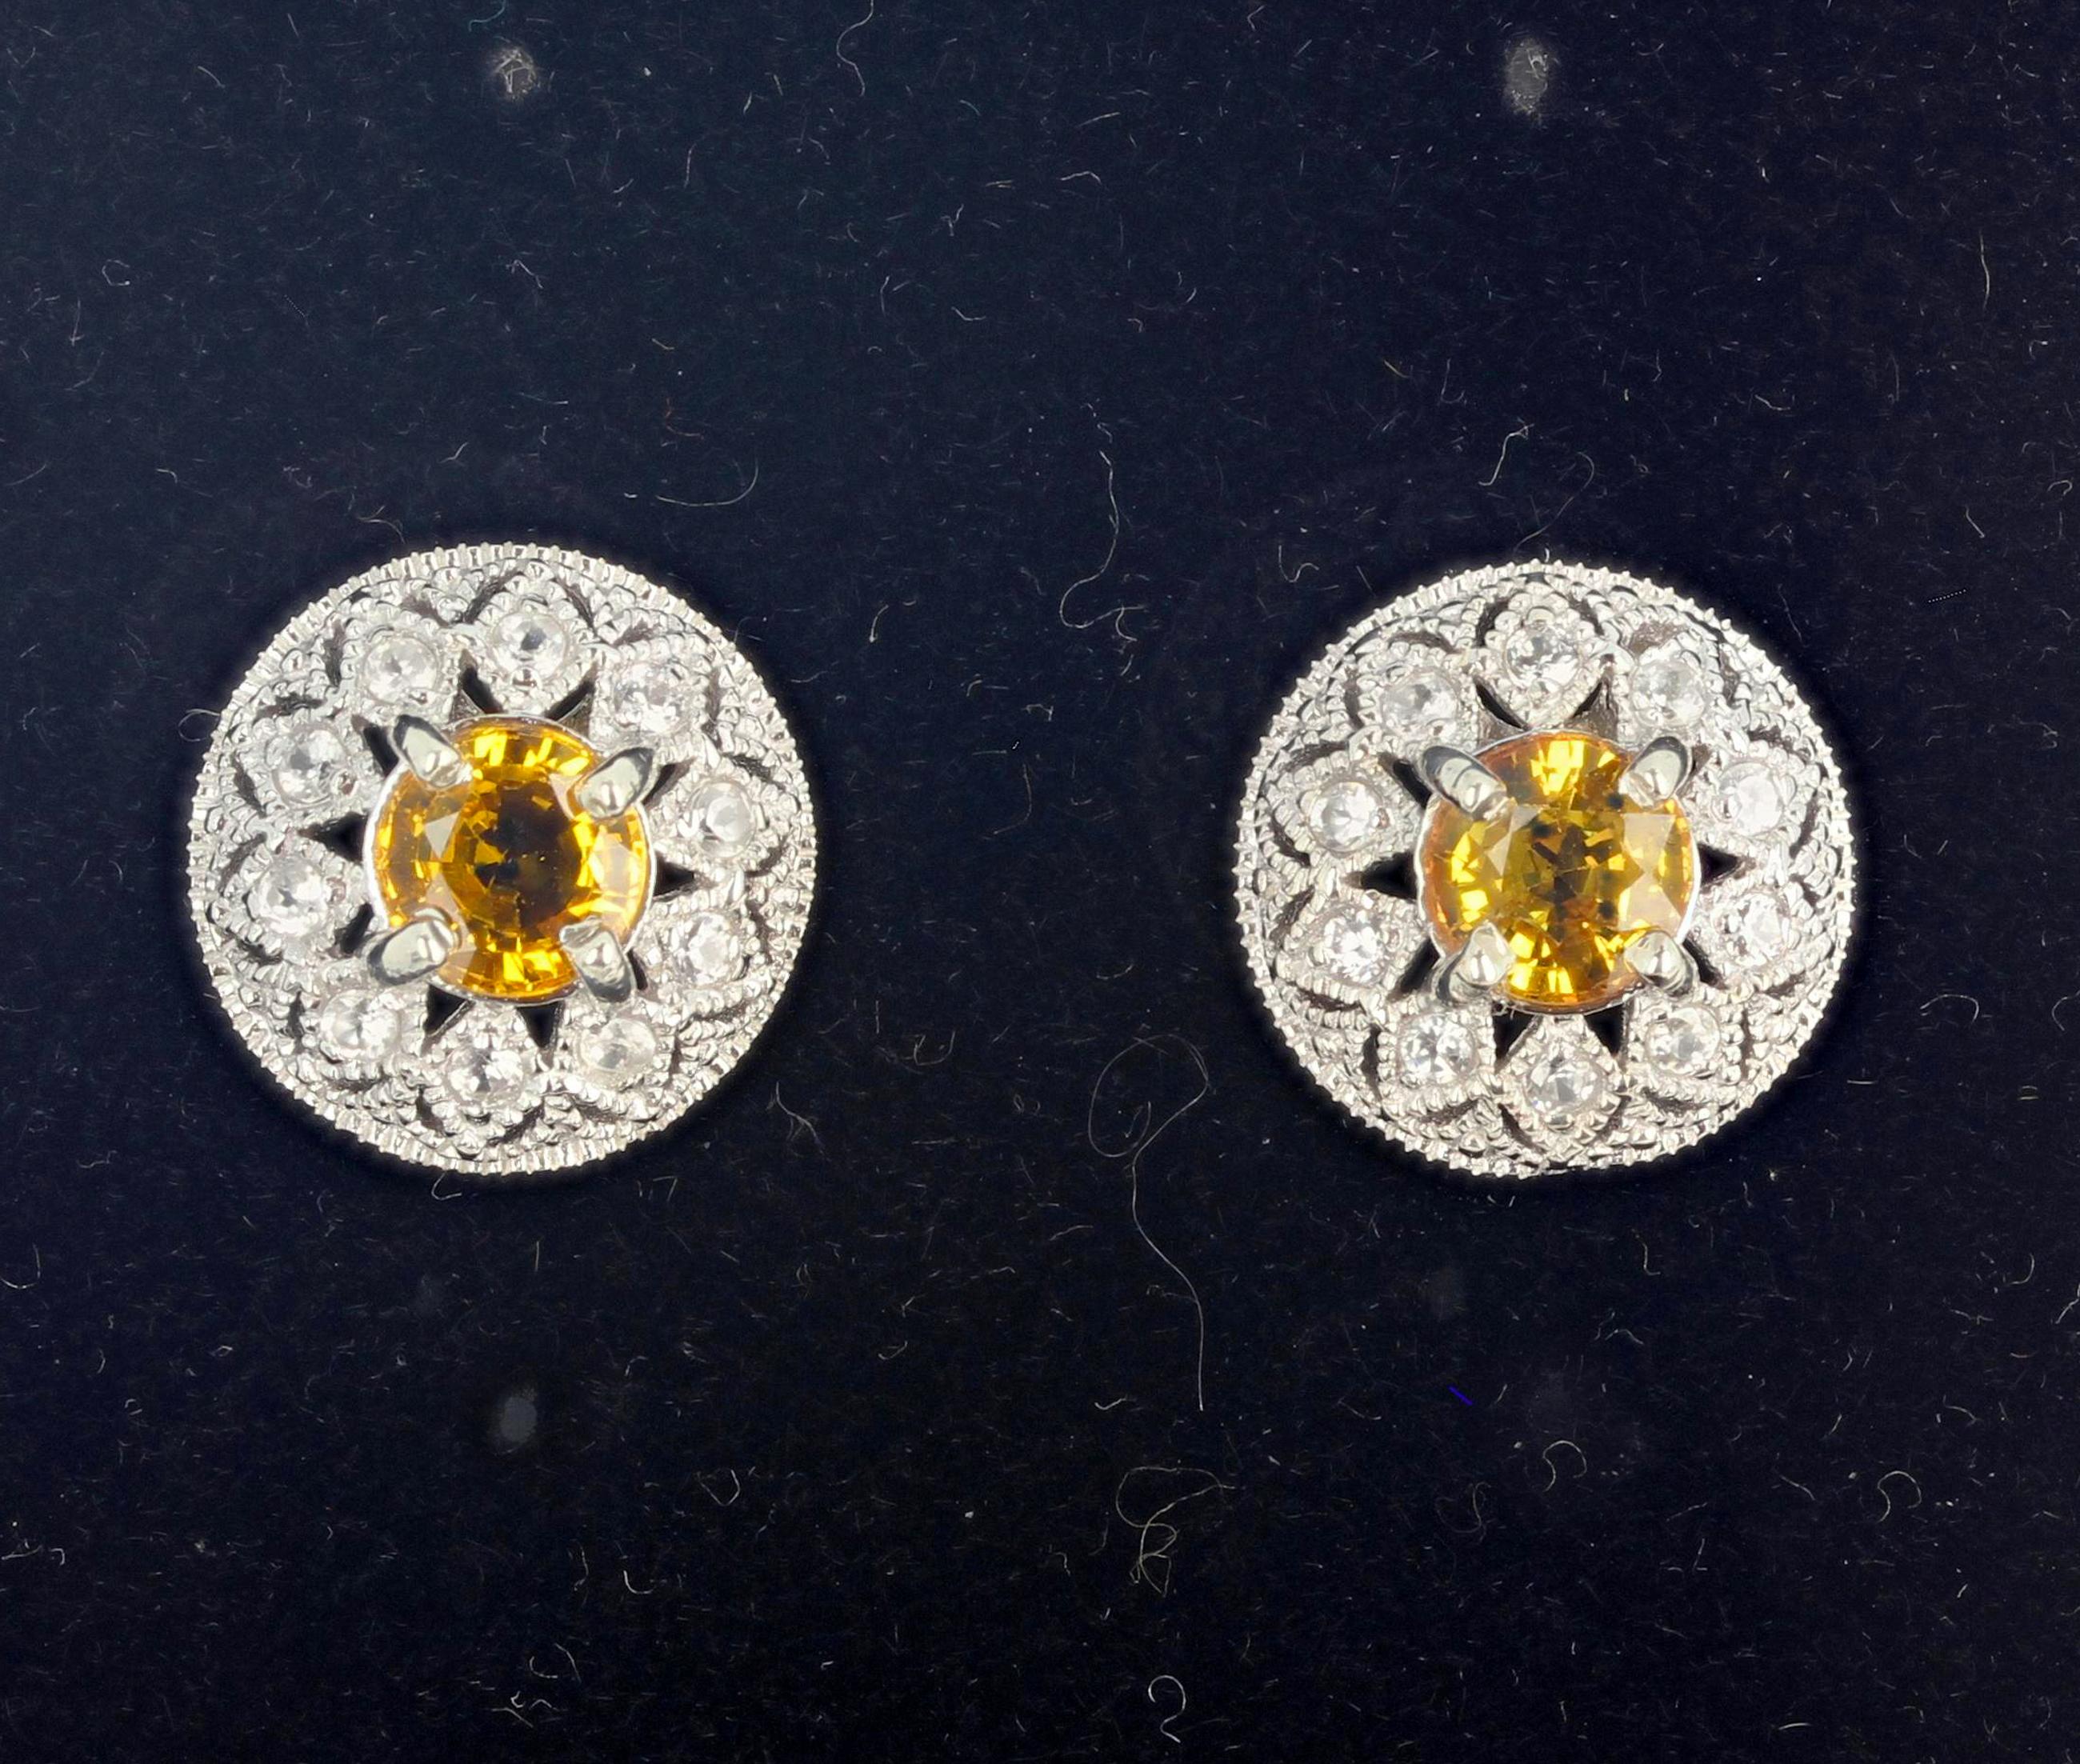 These brilliant 2.7 carats of round unique RARE yellow Songea Sapphires (6 mm) are enhanced with brilliant teeny tiny Diamonds in white gold rhodium plated (platinum) sterling silver stud earrings.  The earrings are approximately 13 mm in diameter. 